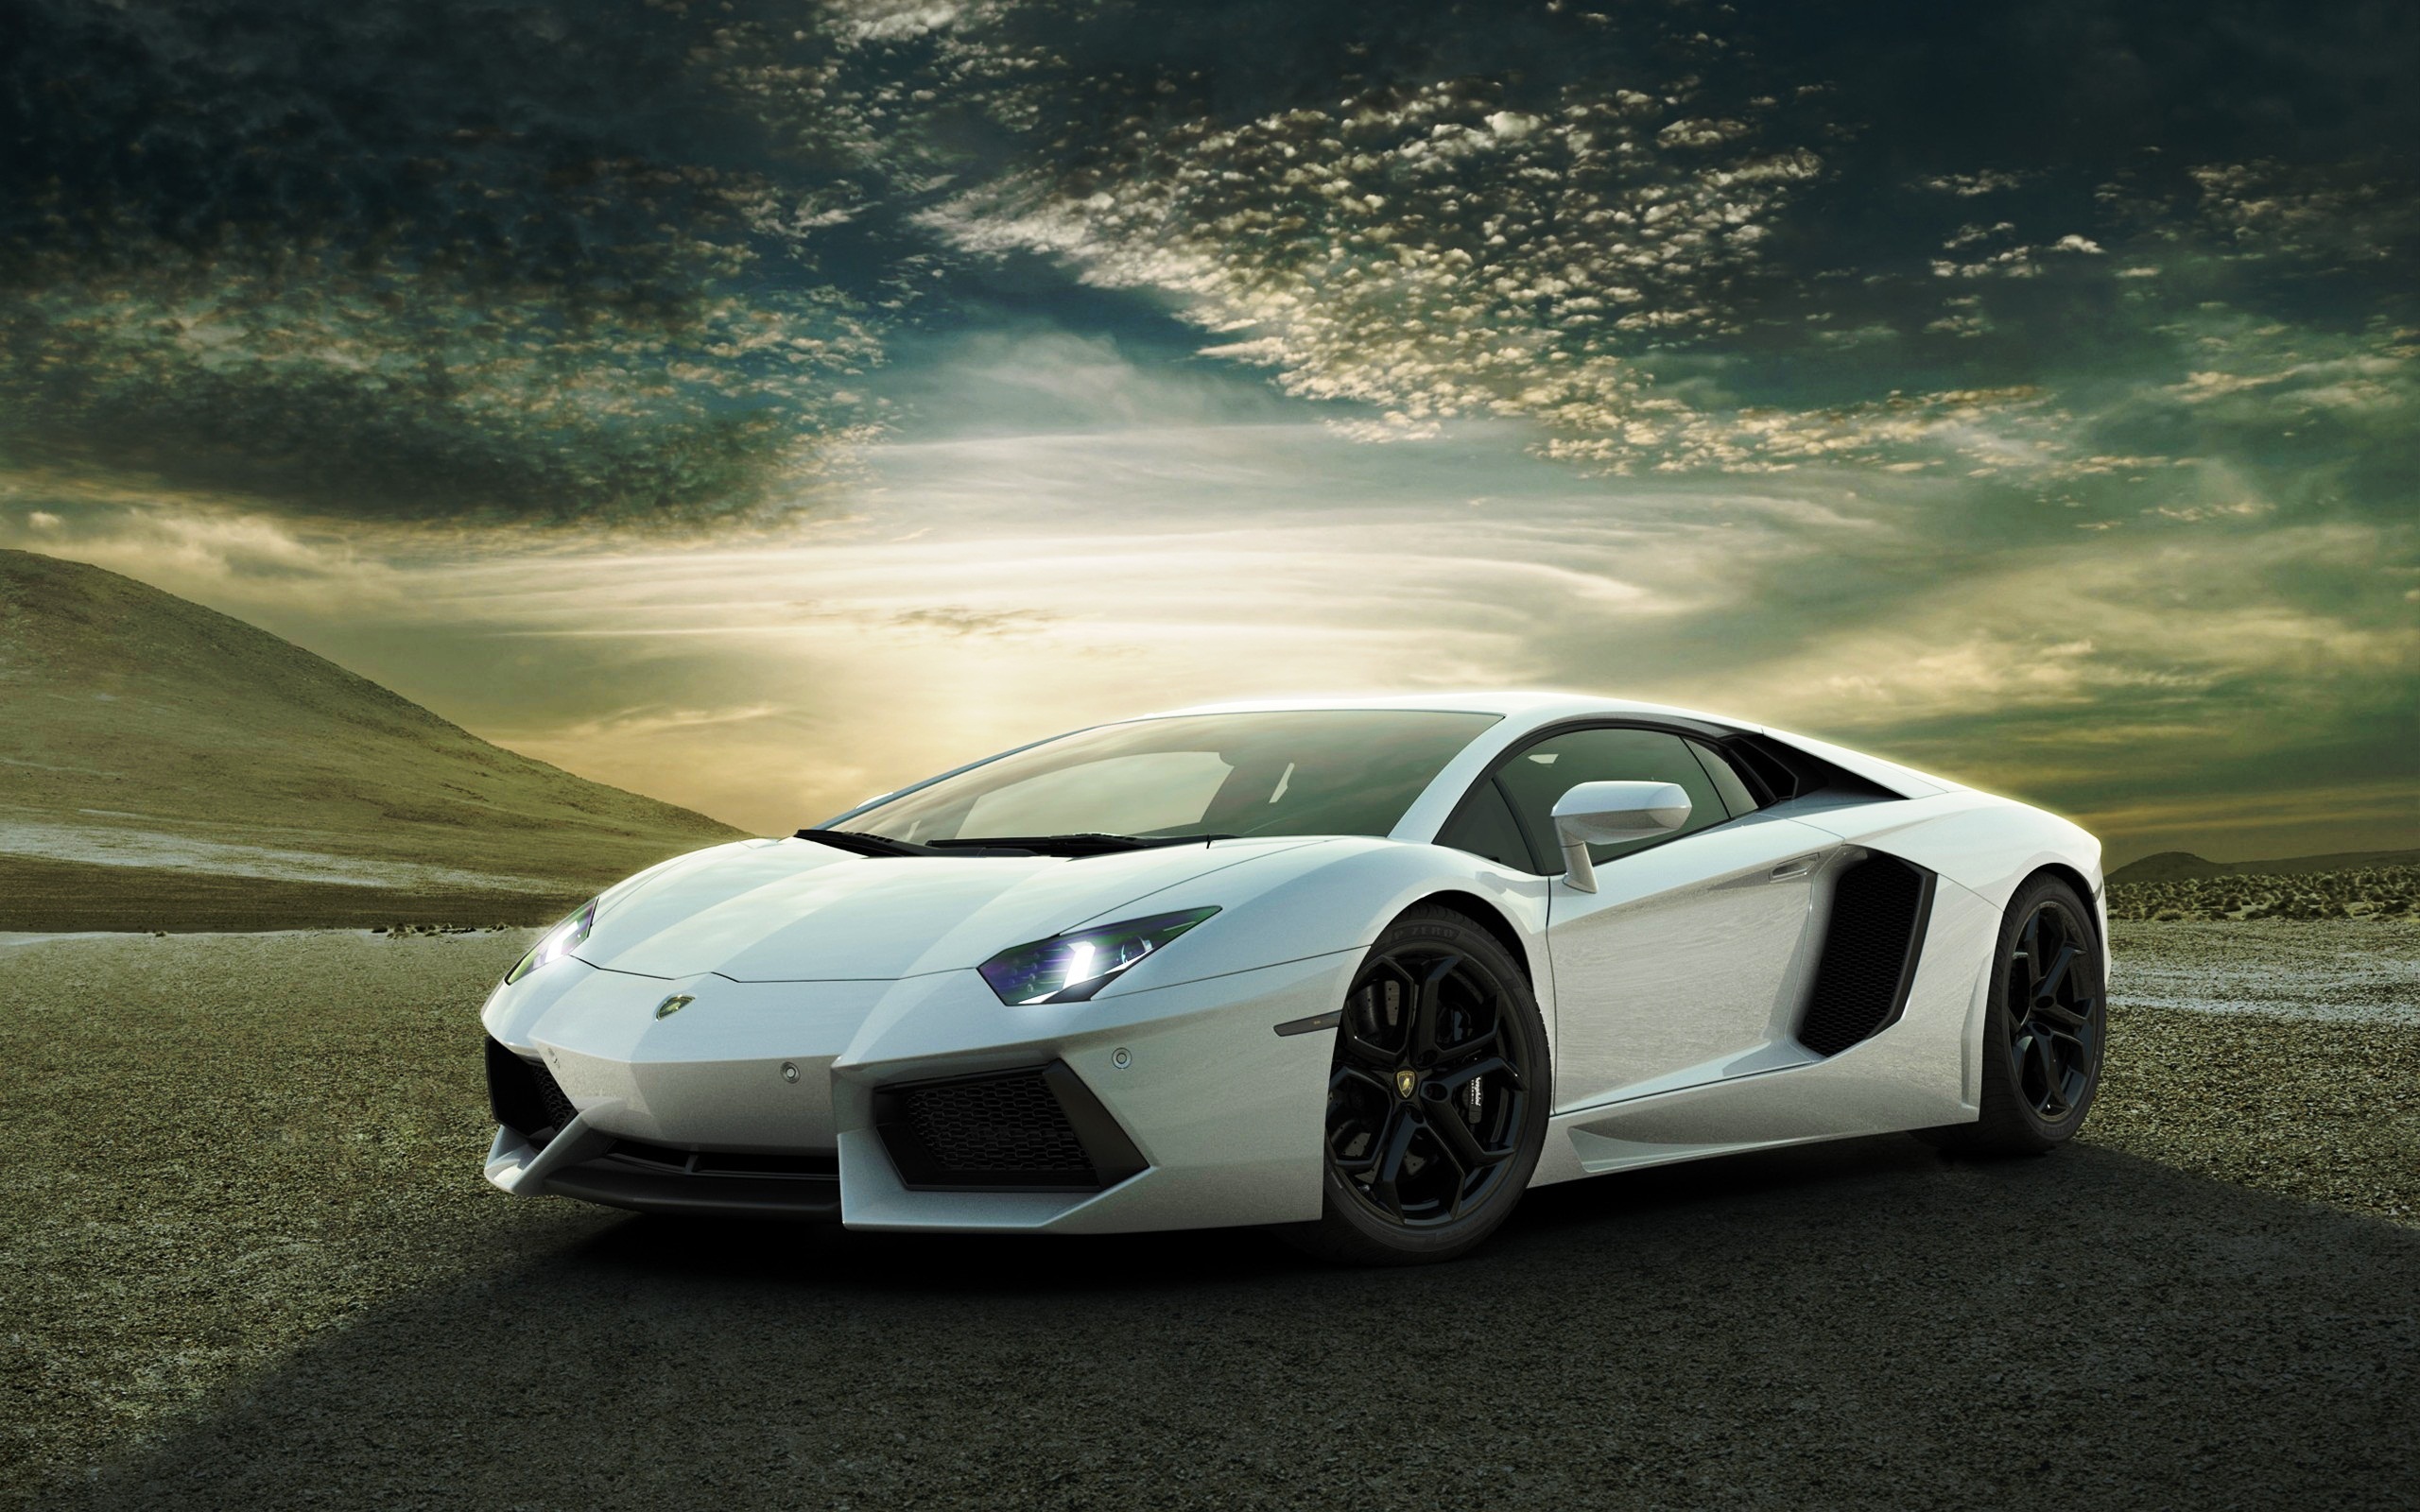 Lamborghini Aventador Wallpapers HD A43 White - lamborghini aventador desktop sports cars, race cars, luxury cars, expensive cars, wallpapers pictures images free download